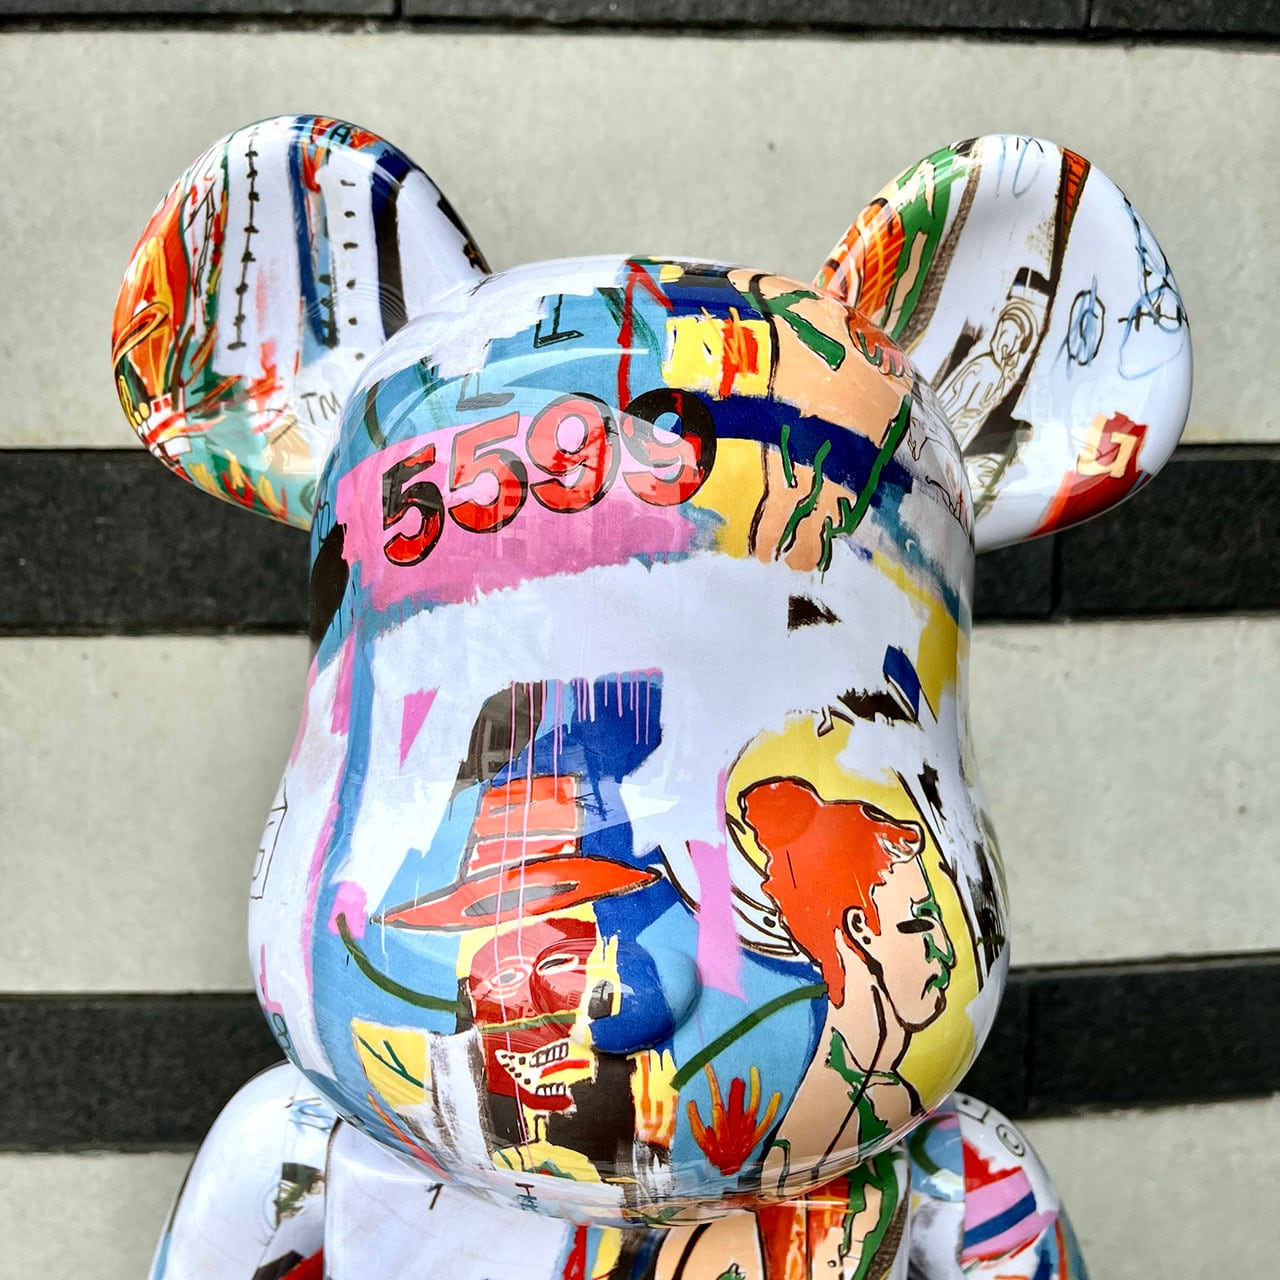 BE@RBRICK　ANDY WARHOL x JEAN-MICHEL BASQUIAT #4／1000% | ON SUNDAYS powered  by BASE